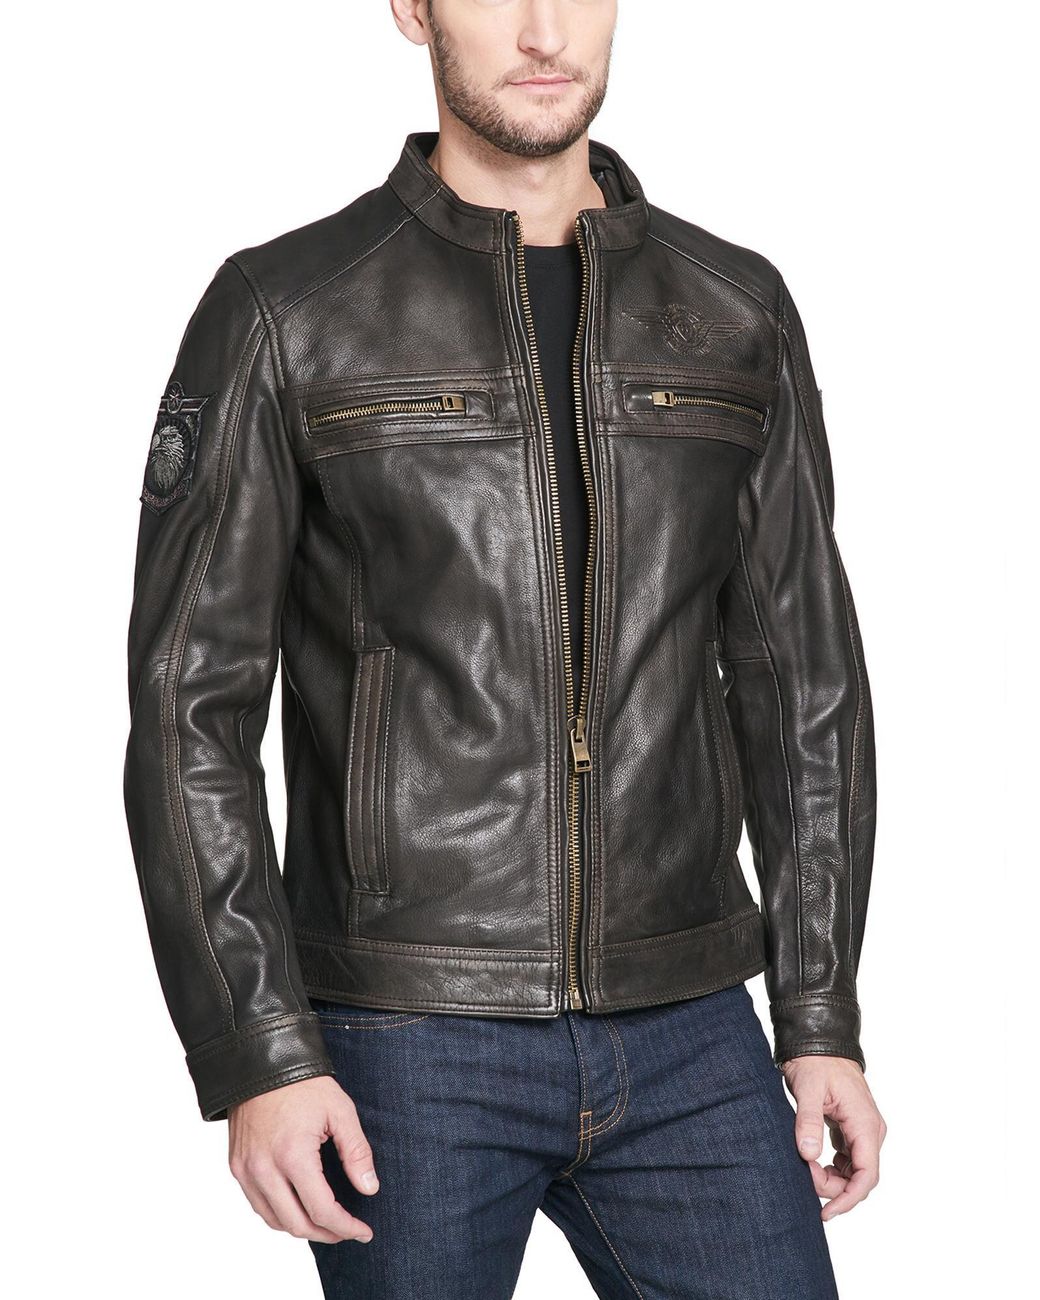 Wilsons Leather Gabe Leather Jacket With Patches in Black for Men - Lyst